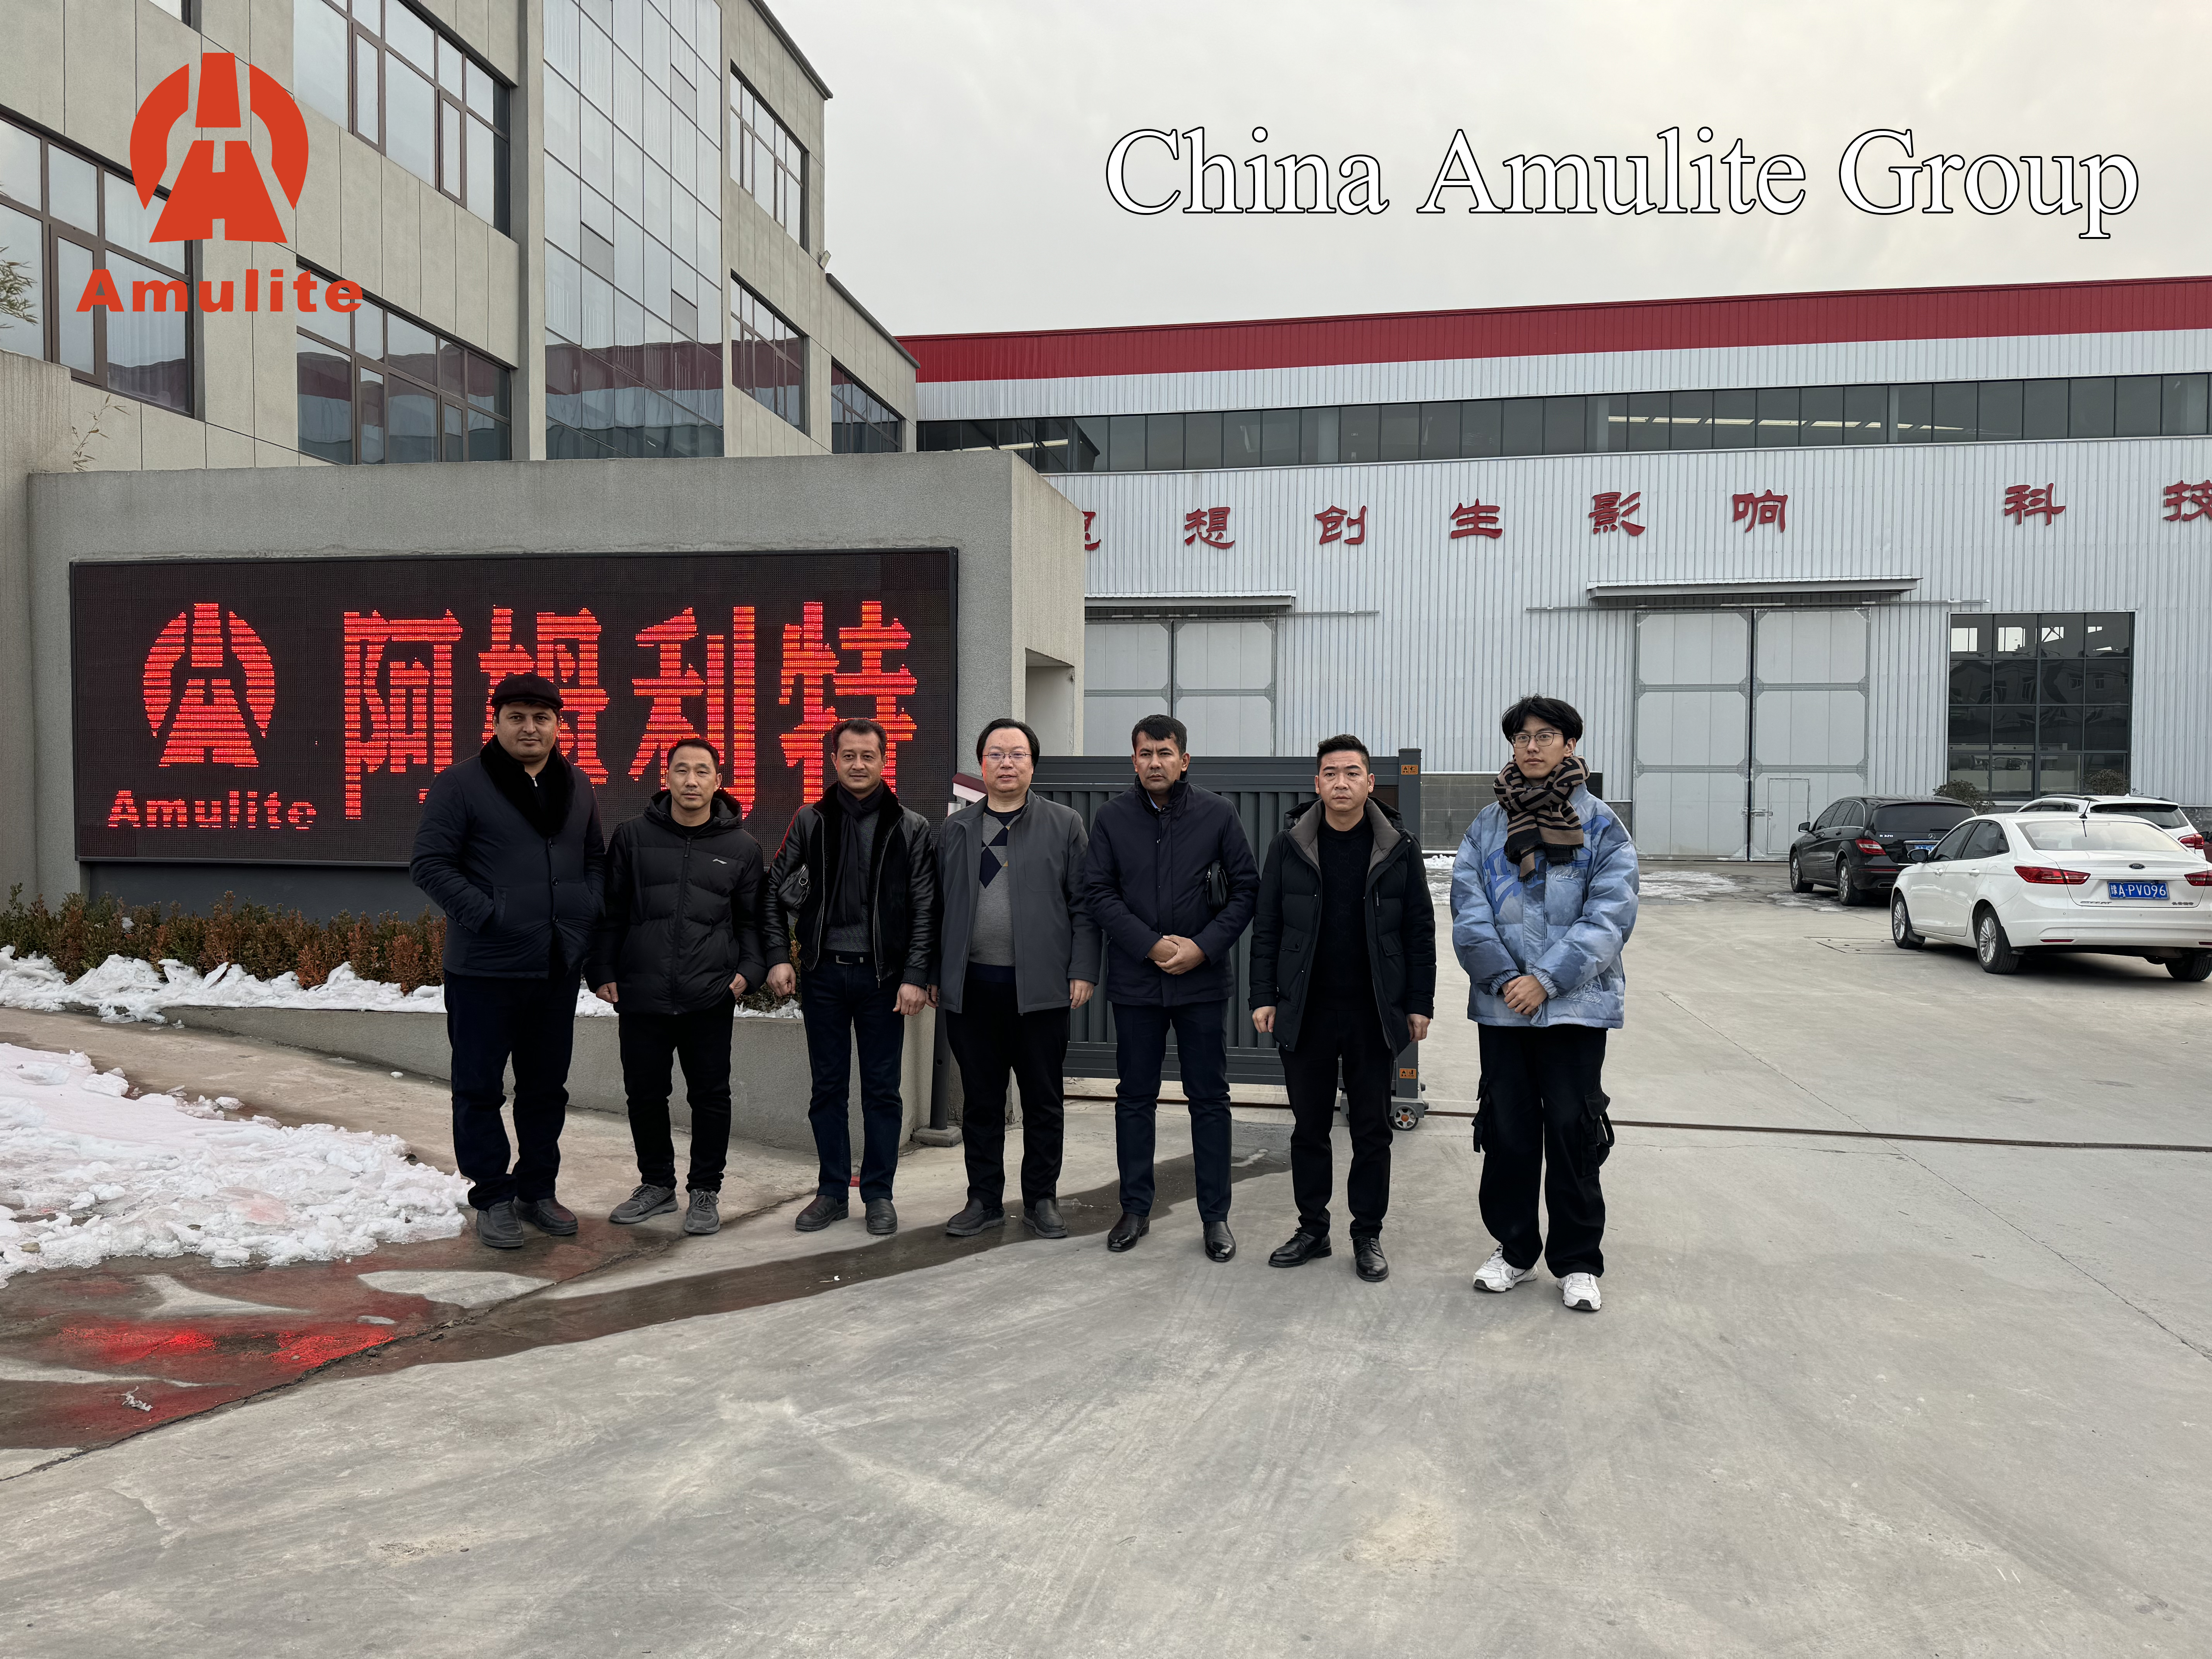 Welcome To Uzbekistan Client Visit China Amulite Group And Sign The Contract！